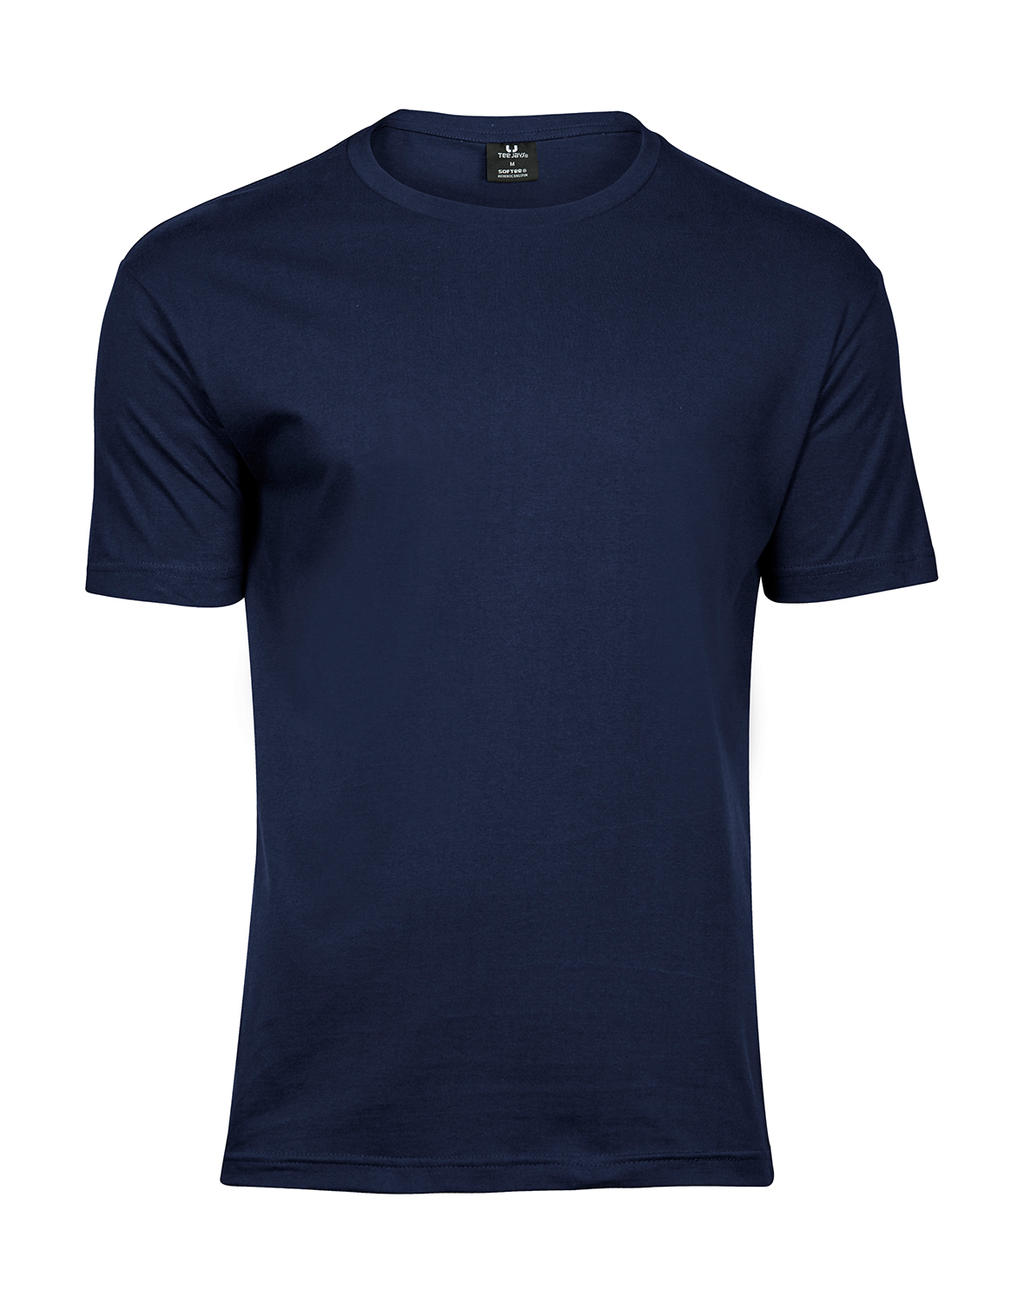  Mens Fashion Sof Tee in Farbe Navy